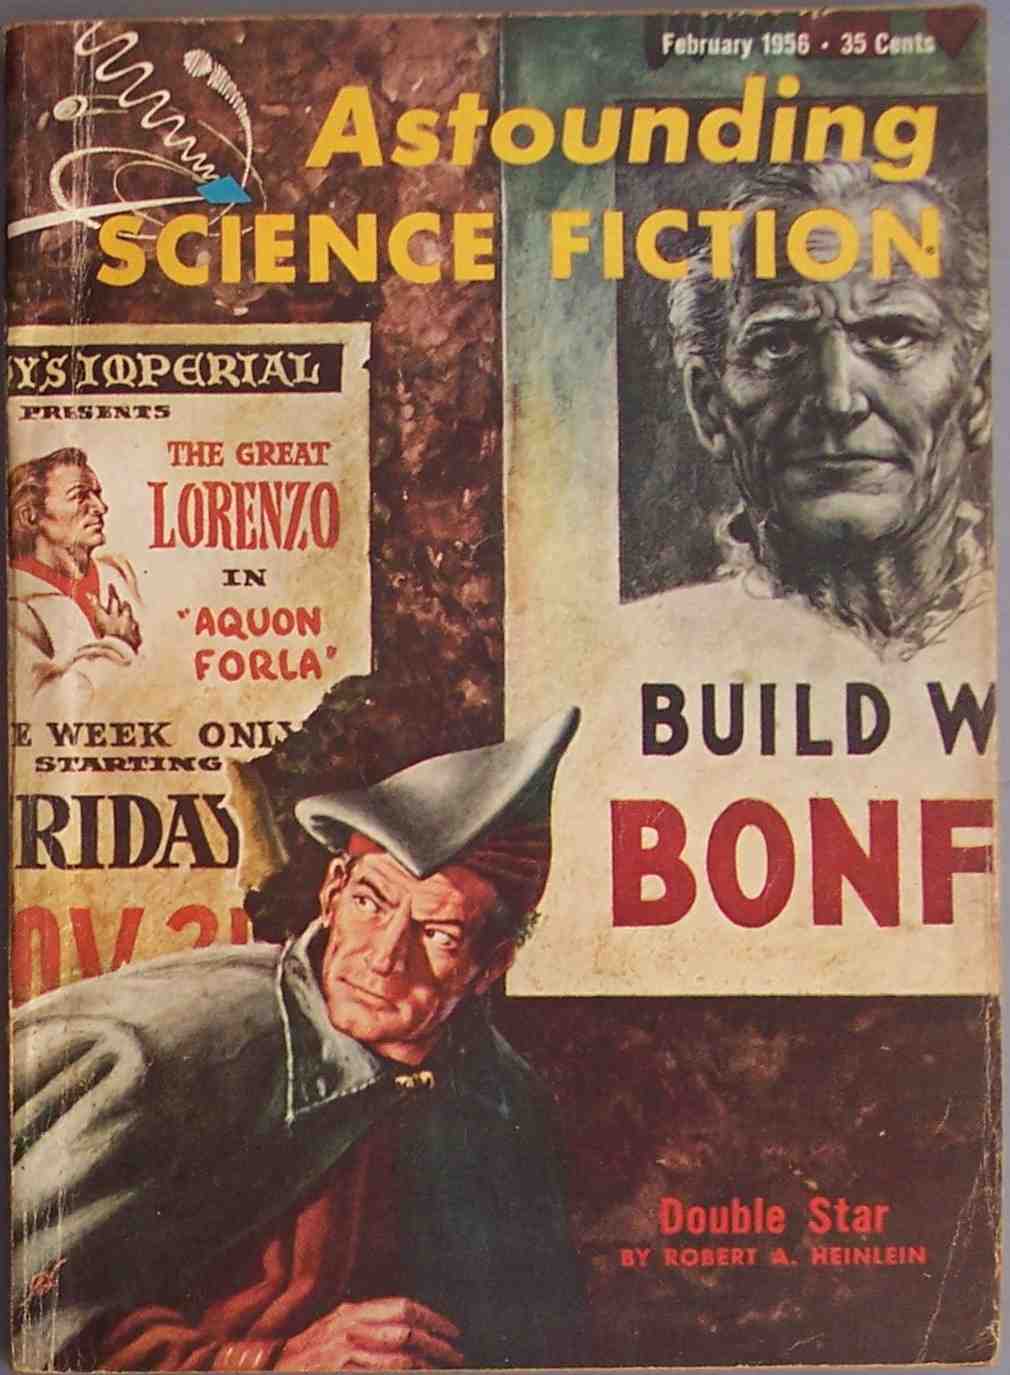 a cover for science fiction magazine from the early 1940s